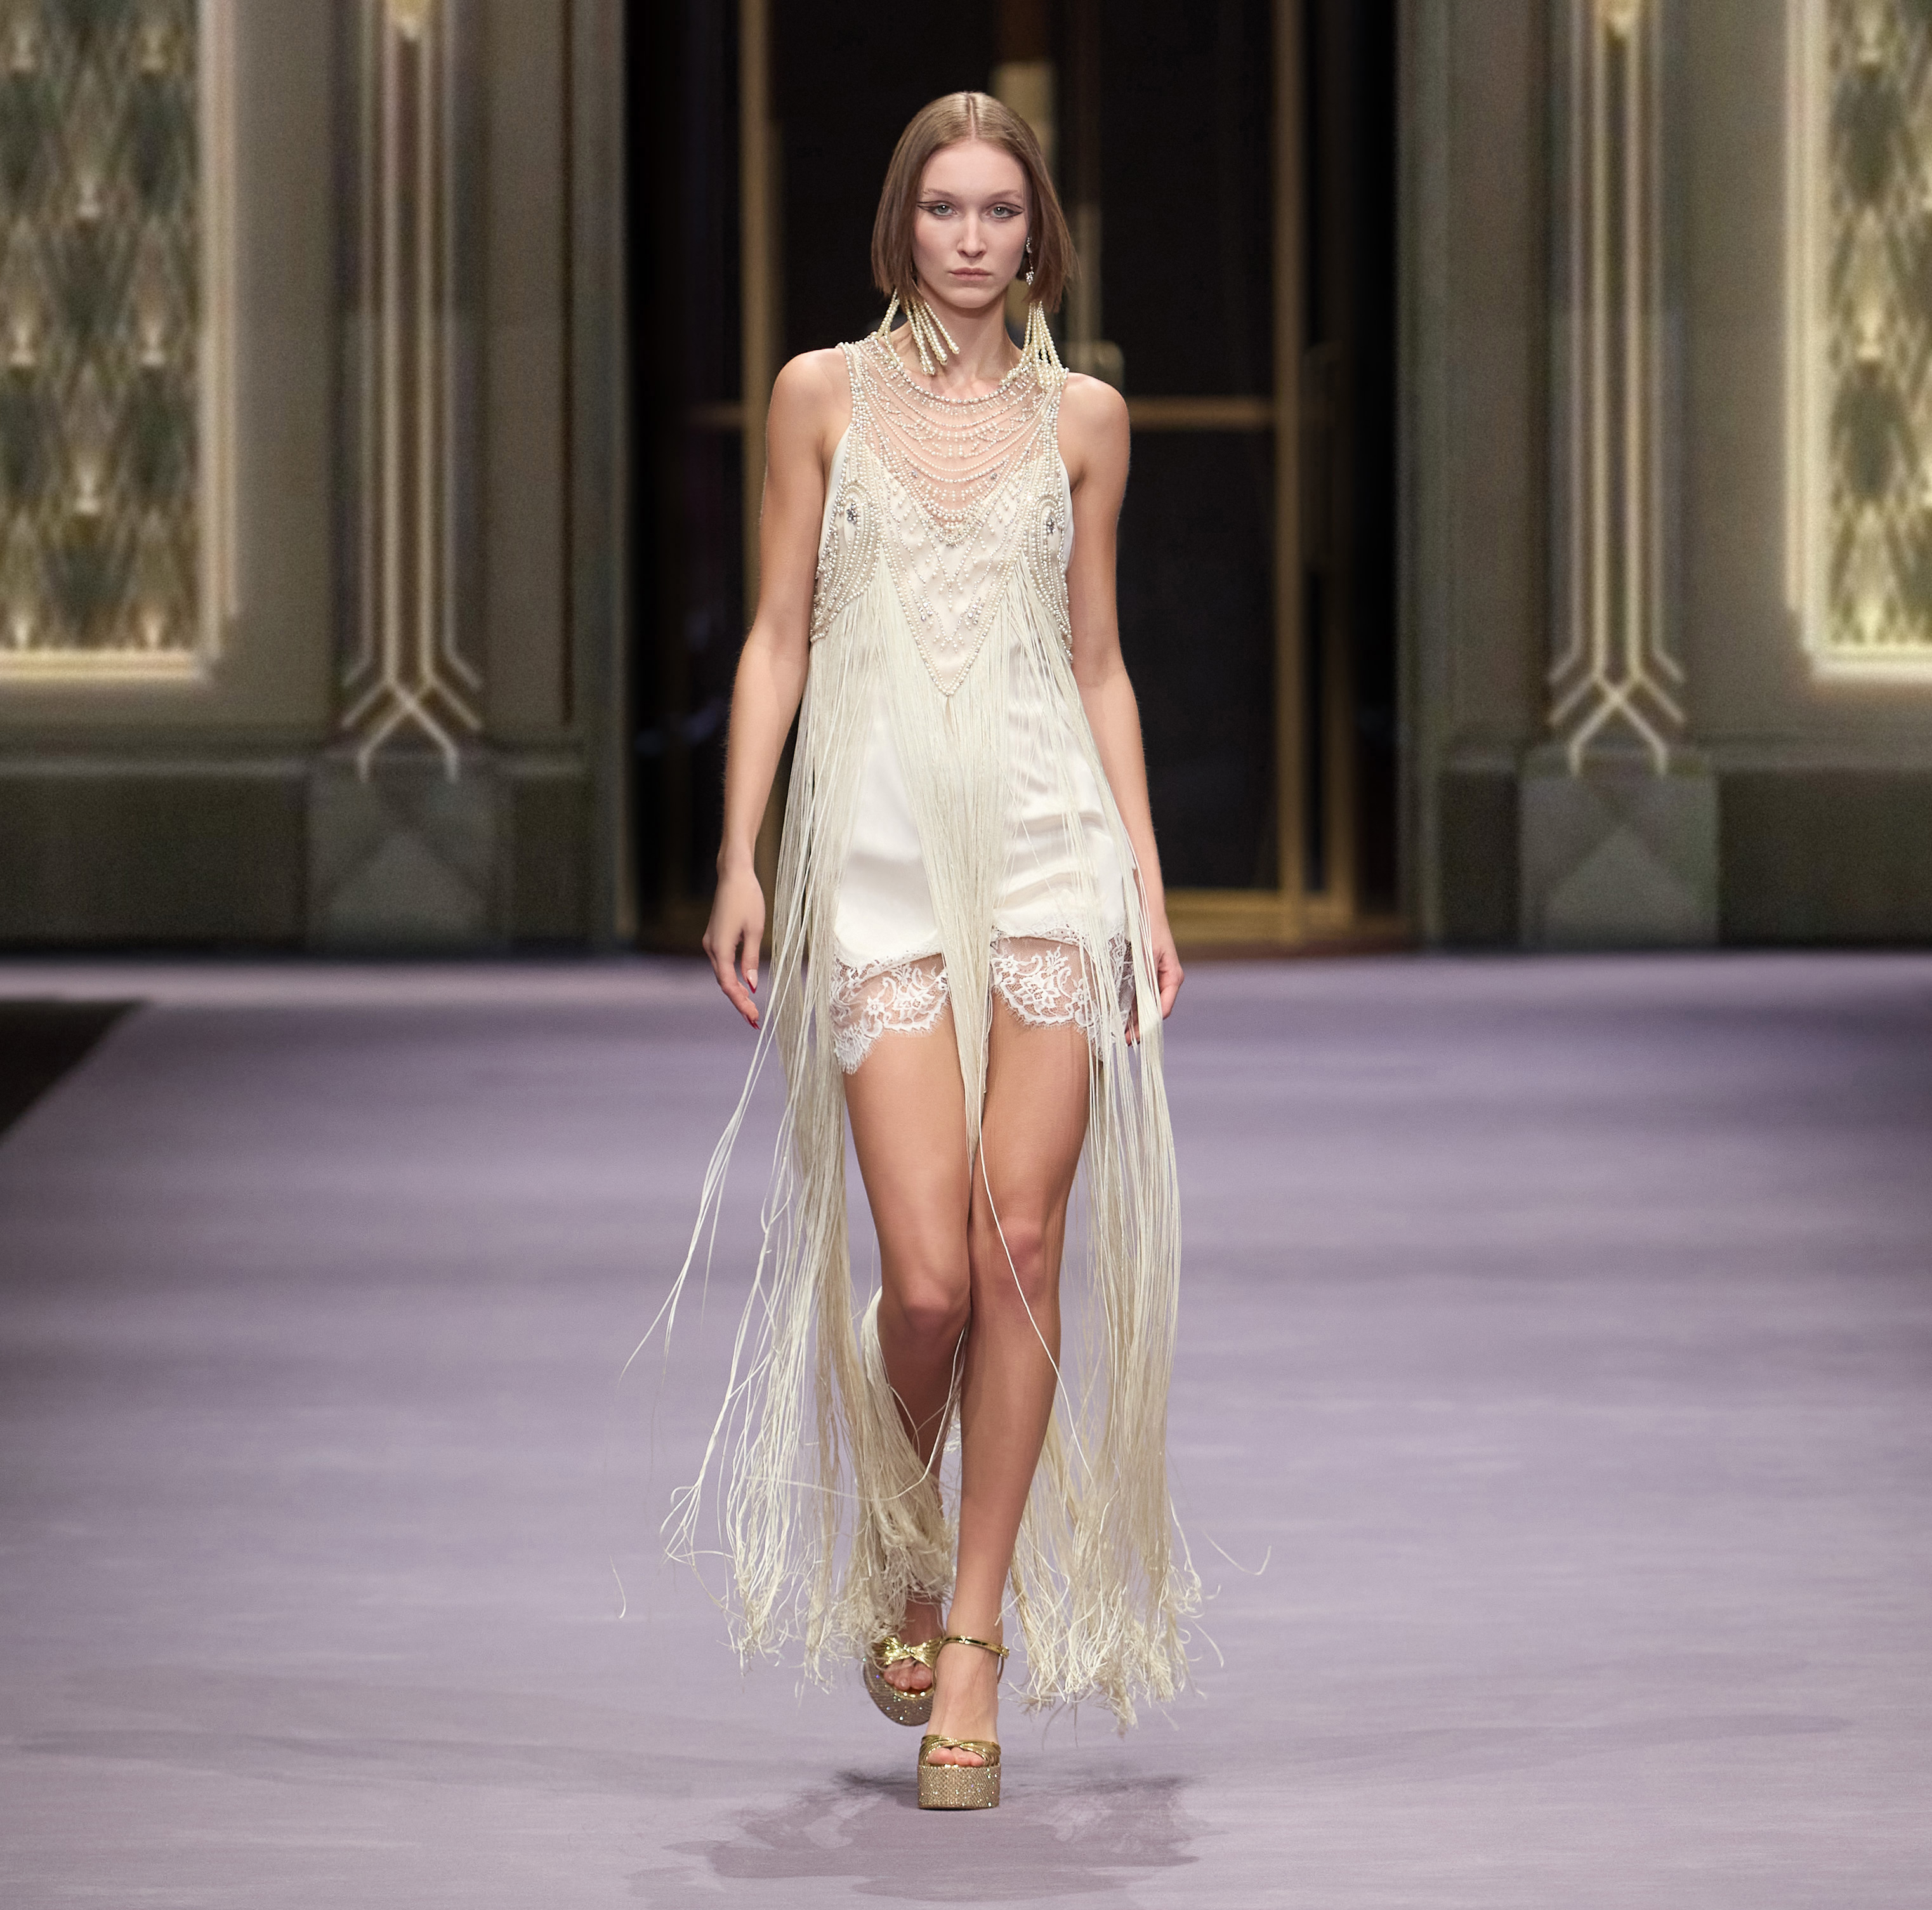 Tulle Red Carpet dress with fringes and beads - Elisabetta Franchi